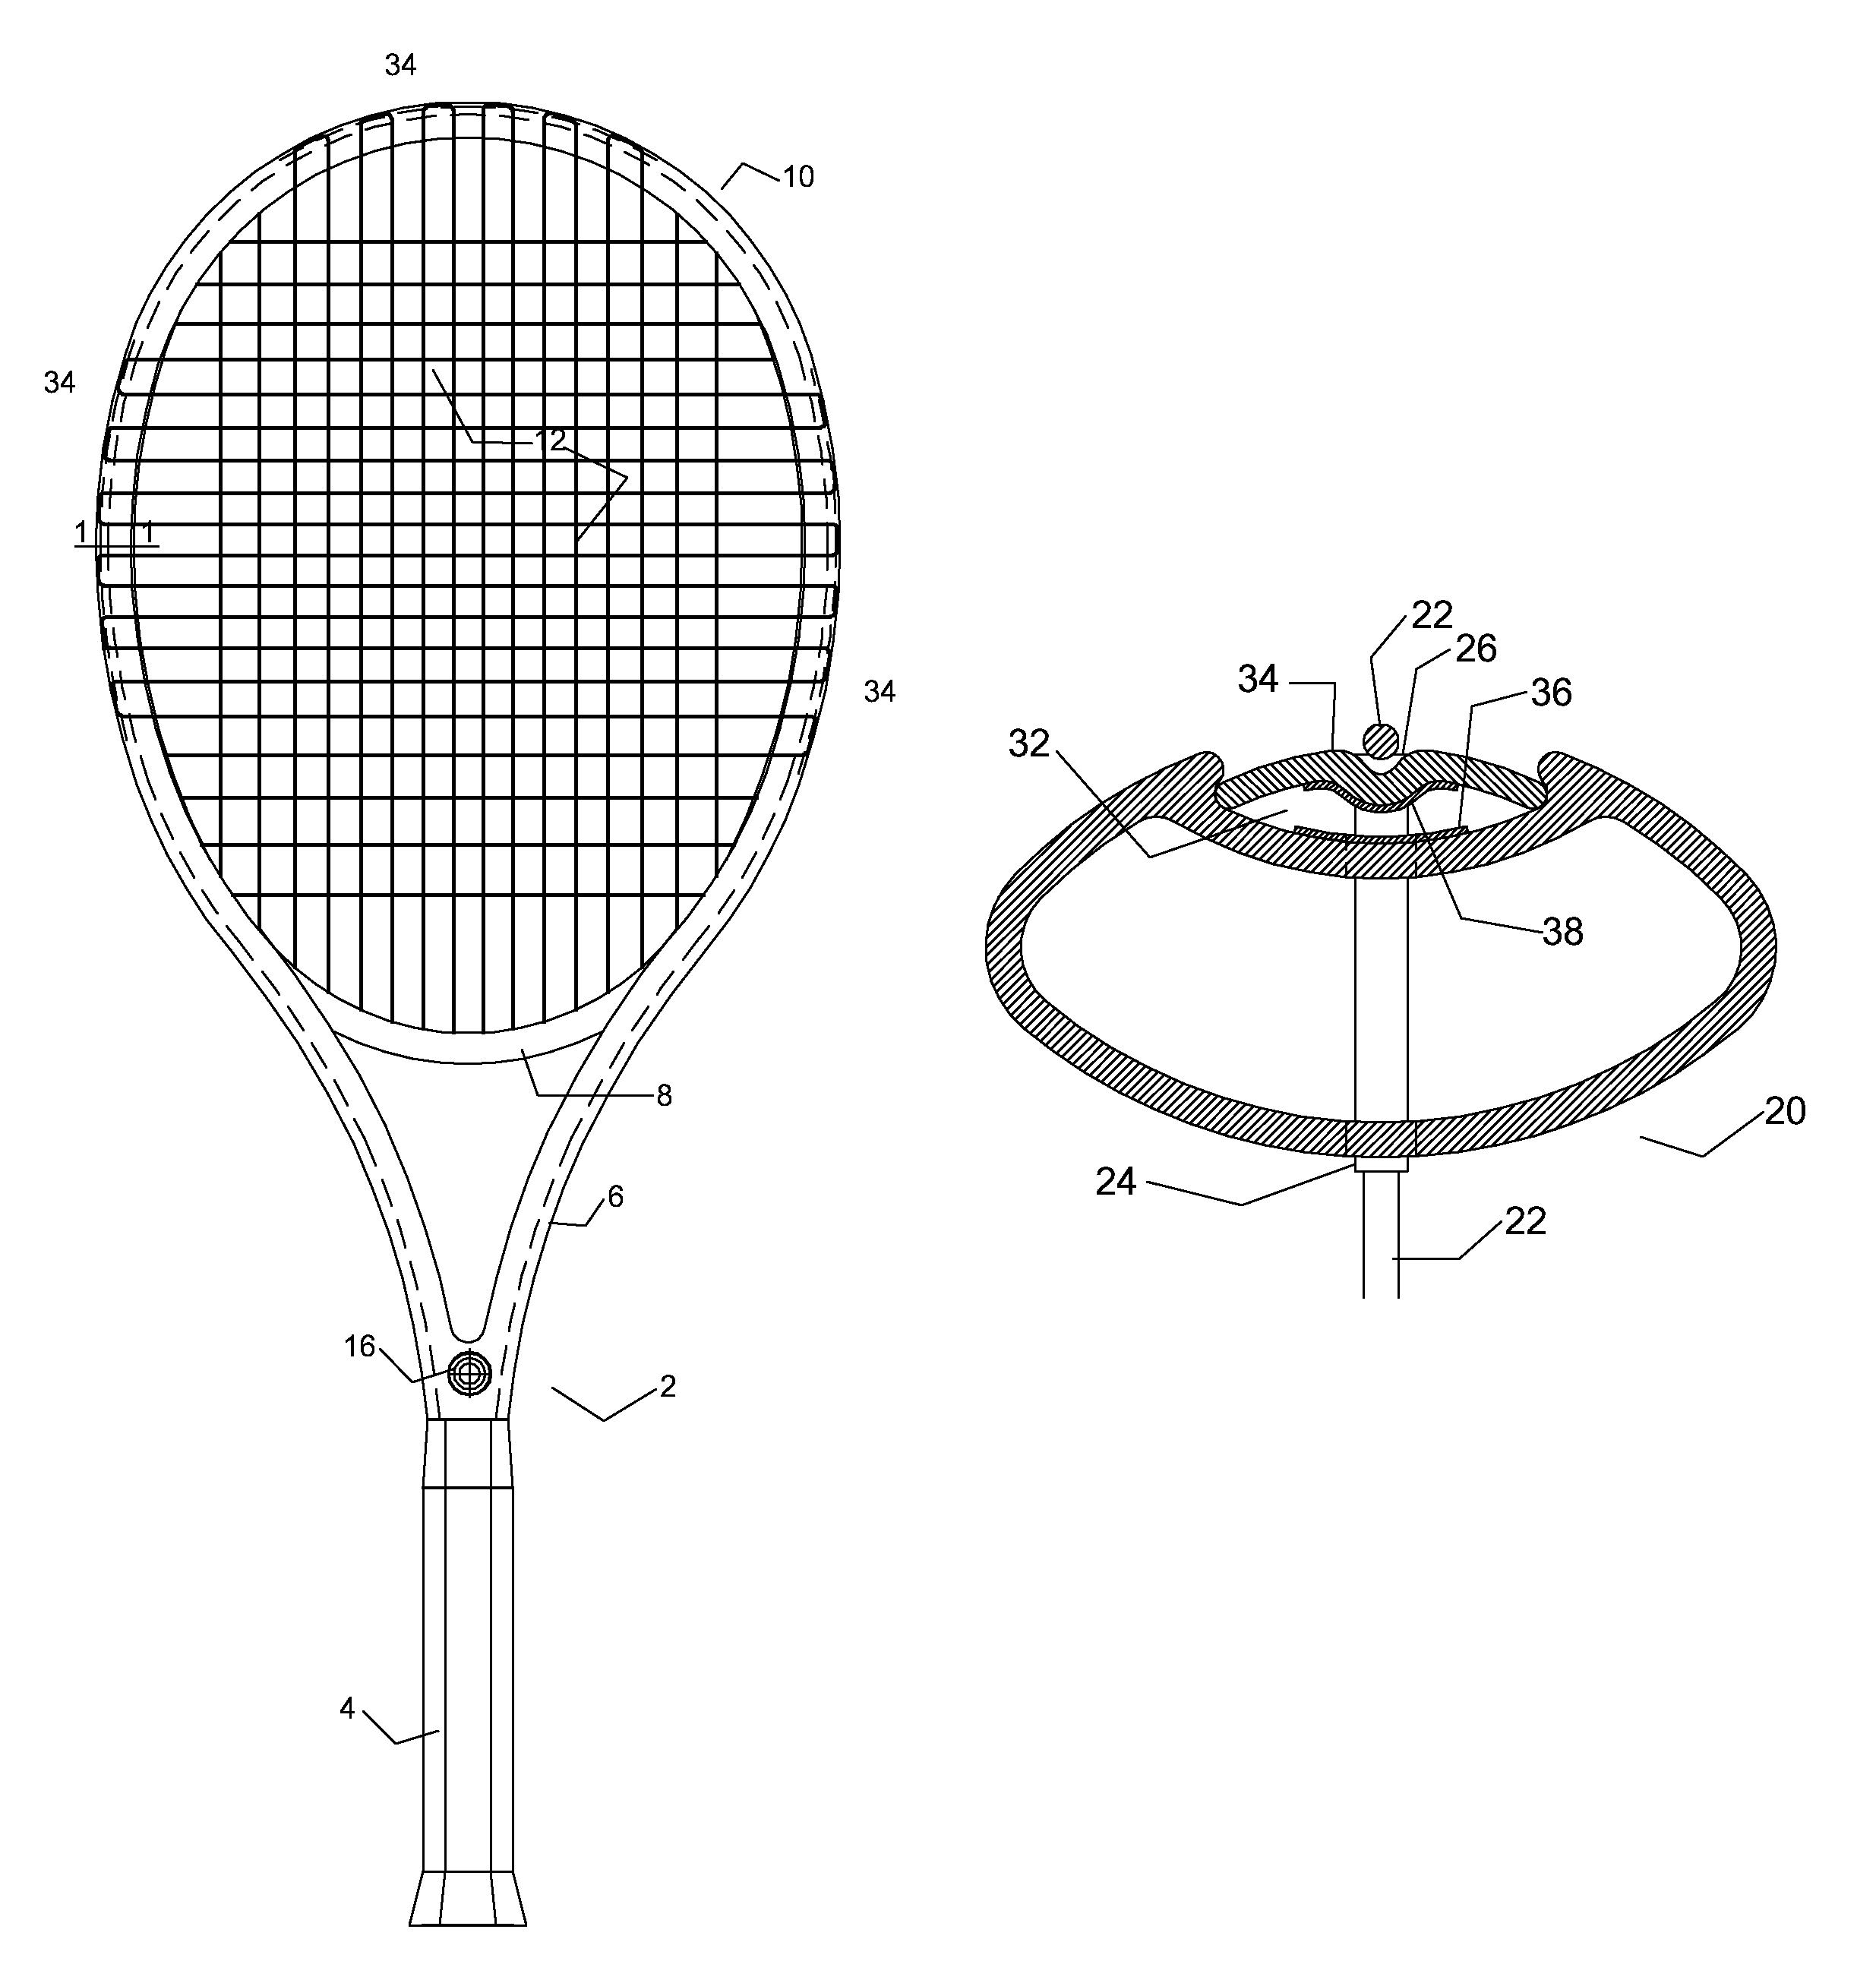 System and method for a game racquet including an actuator